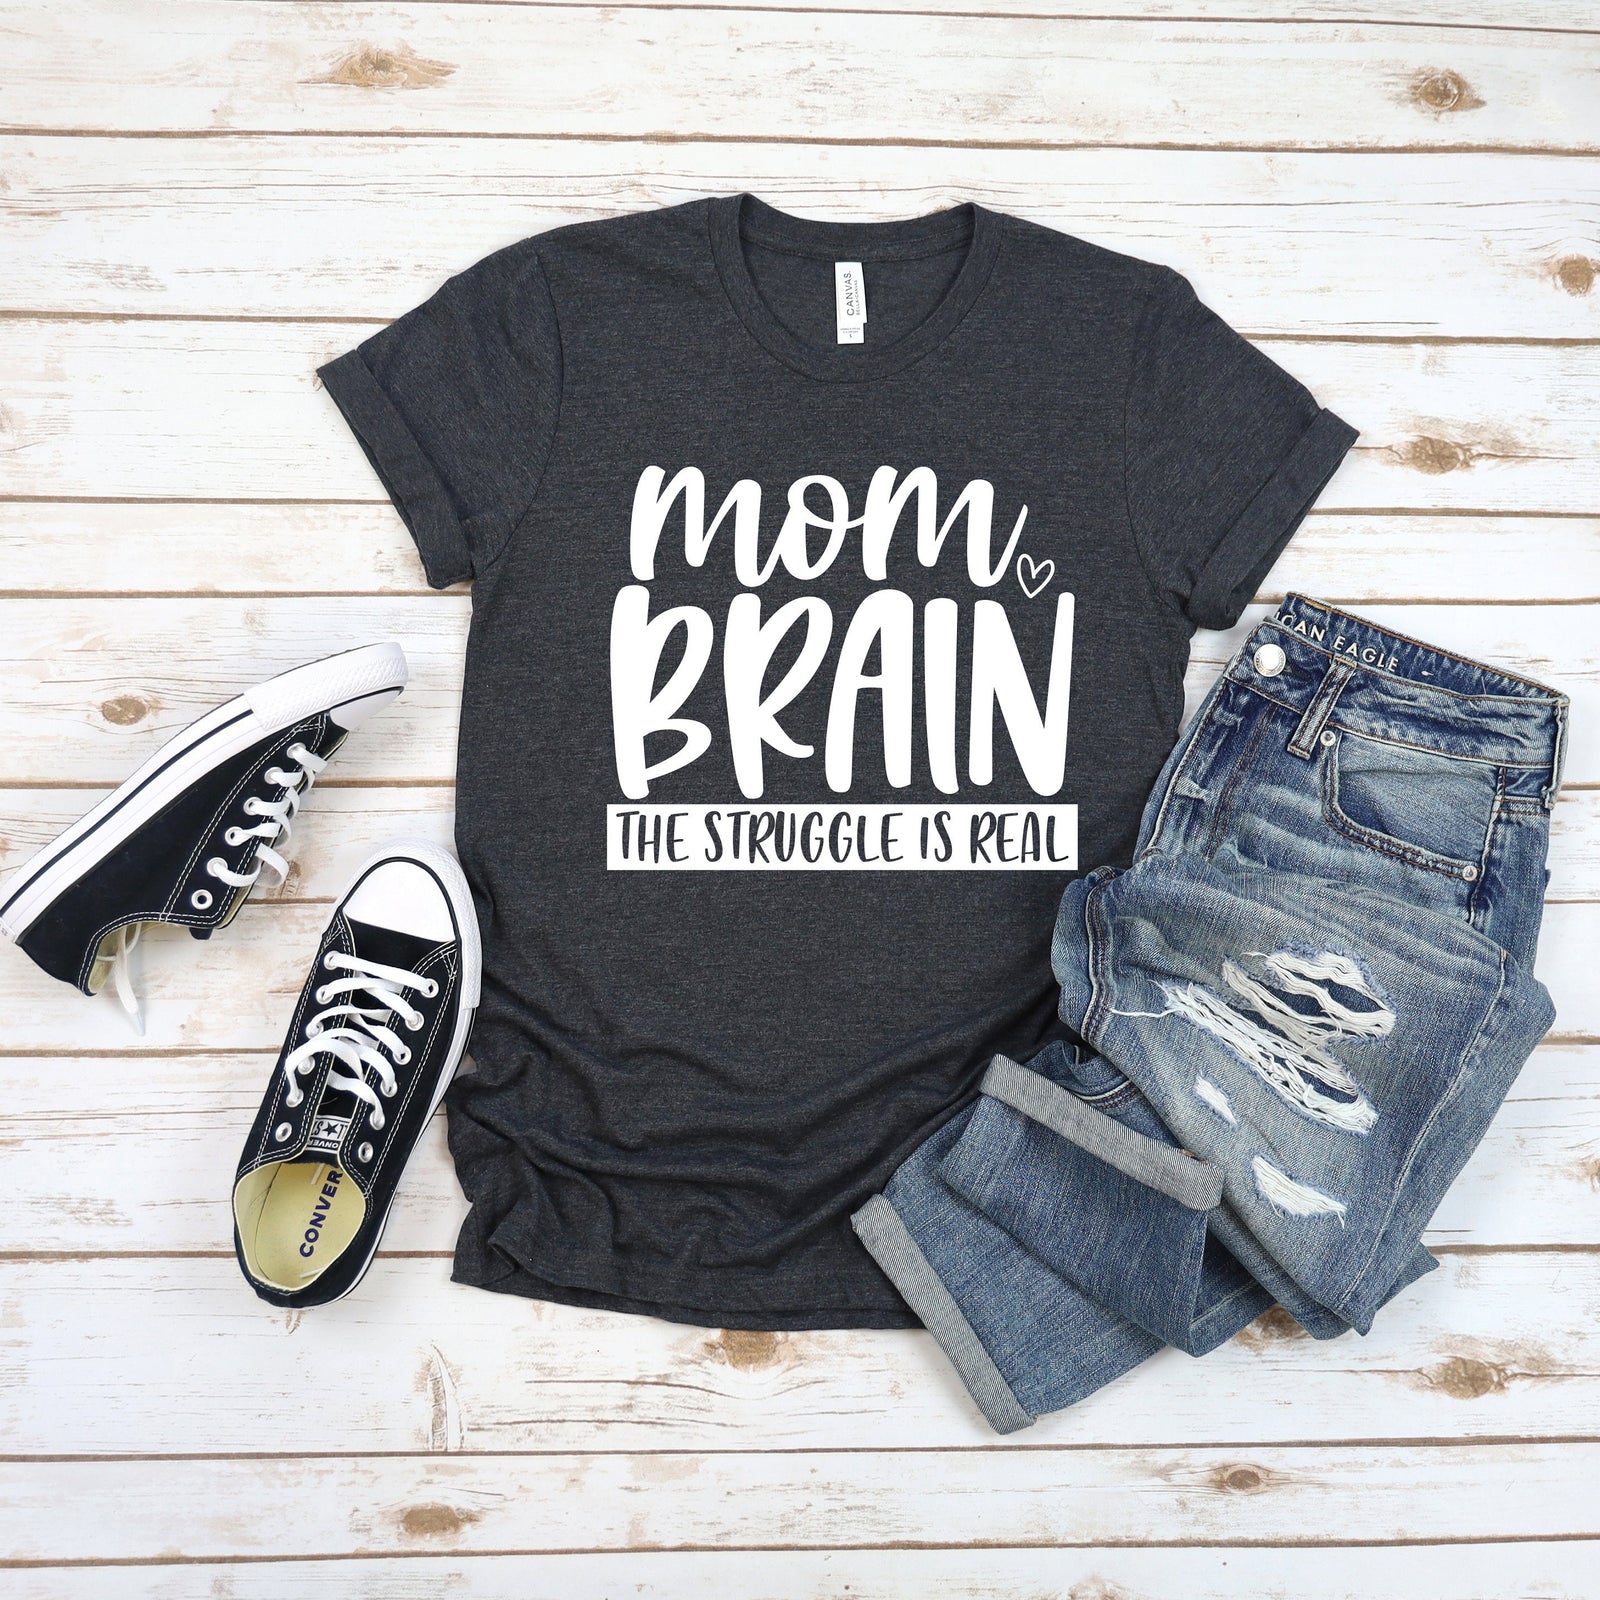 Mom Brain the Struggle is Real Adult Unisex T Shirt -Mother's Day Gift Idea  - Mom tee - Funny Mom Shirts